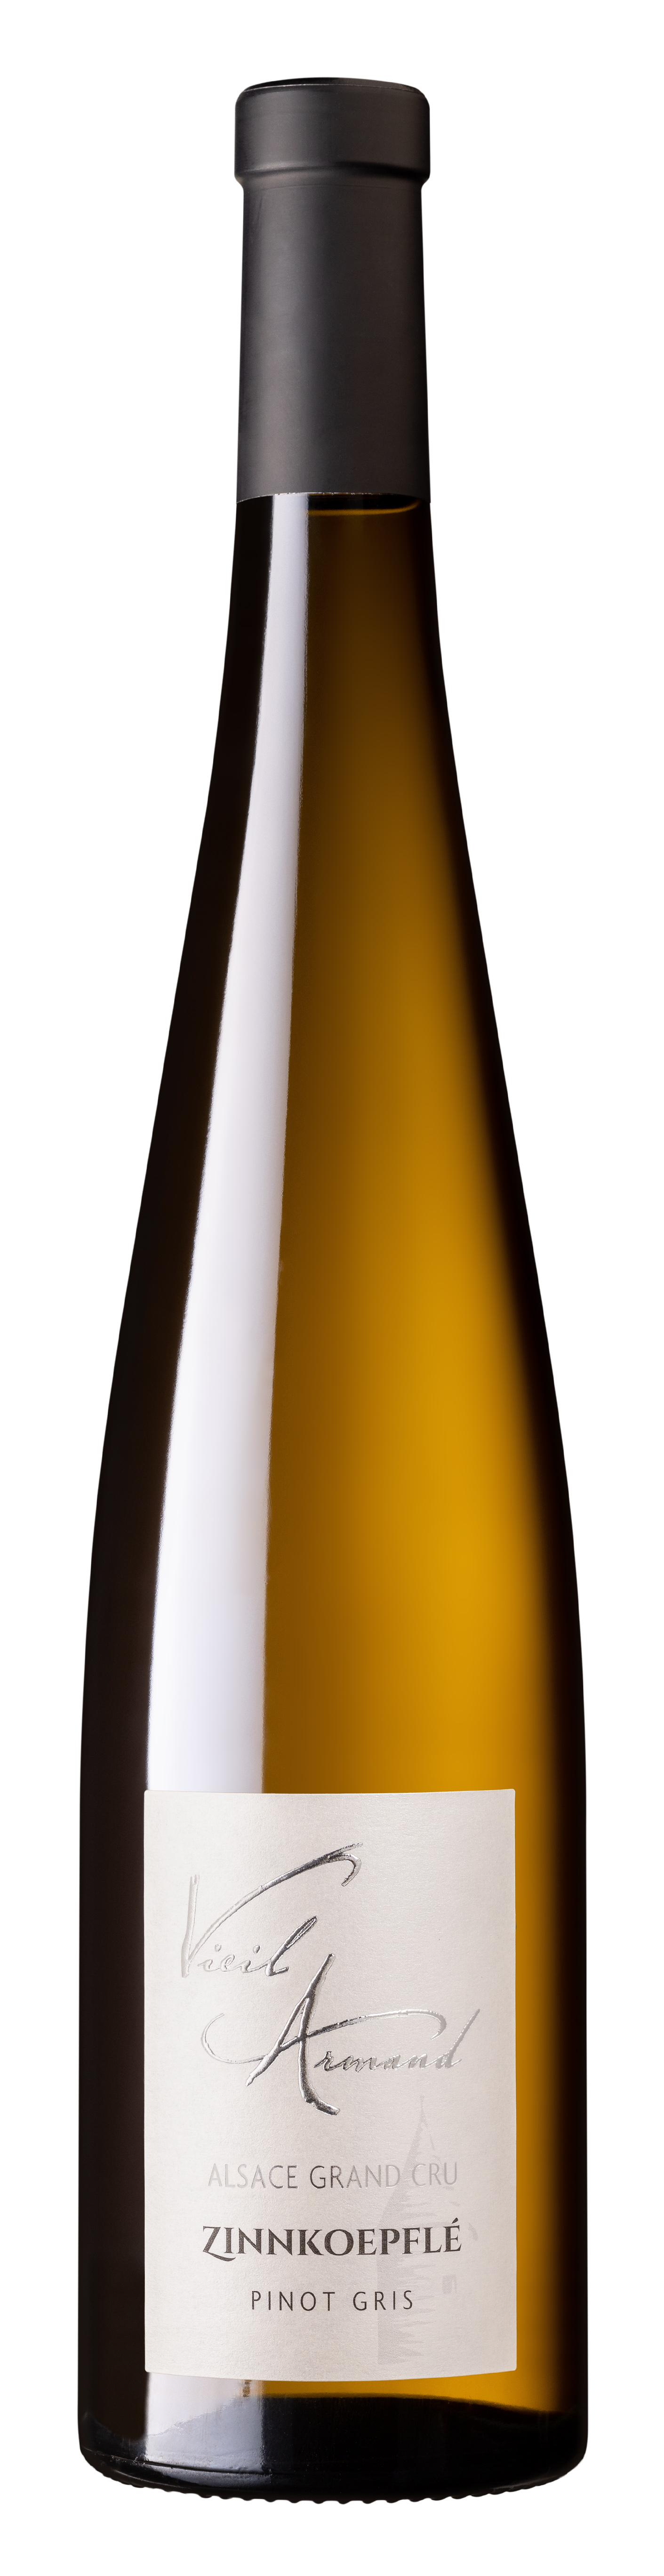 Alsace Grand Cru Pinot Gris Zinnkoepfle 2020